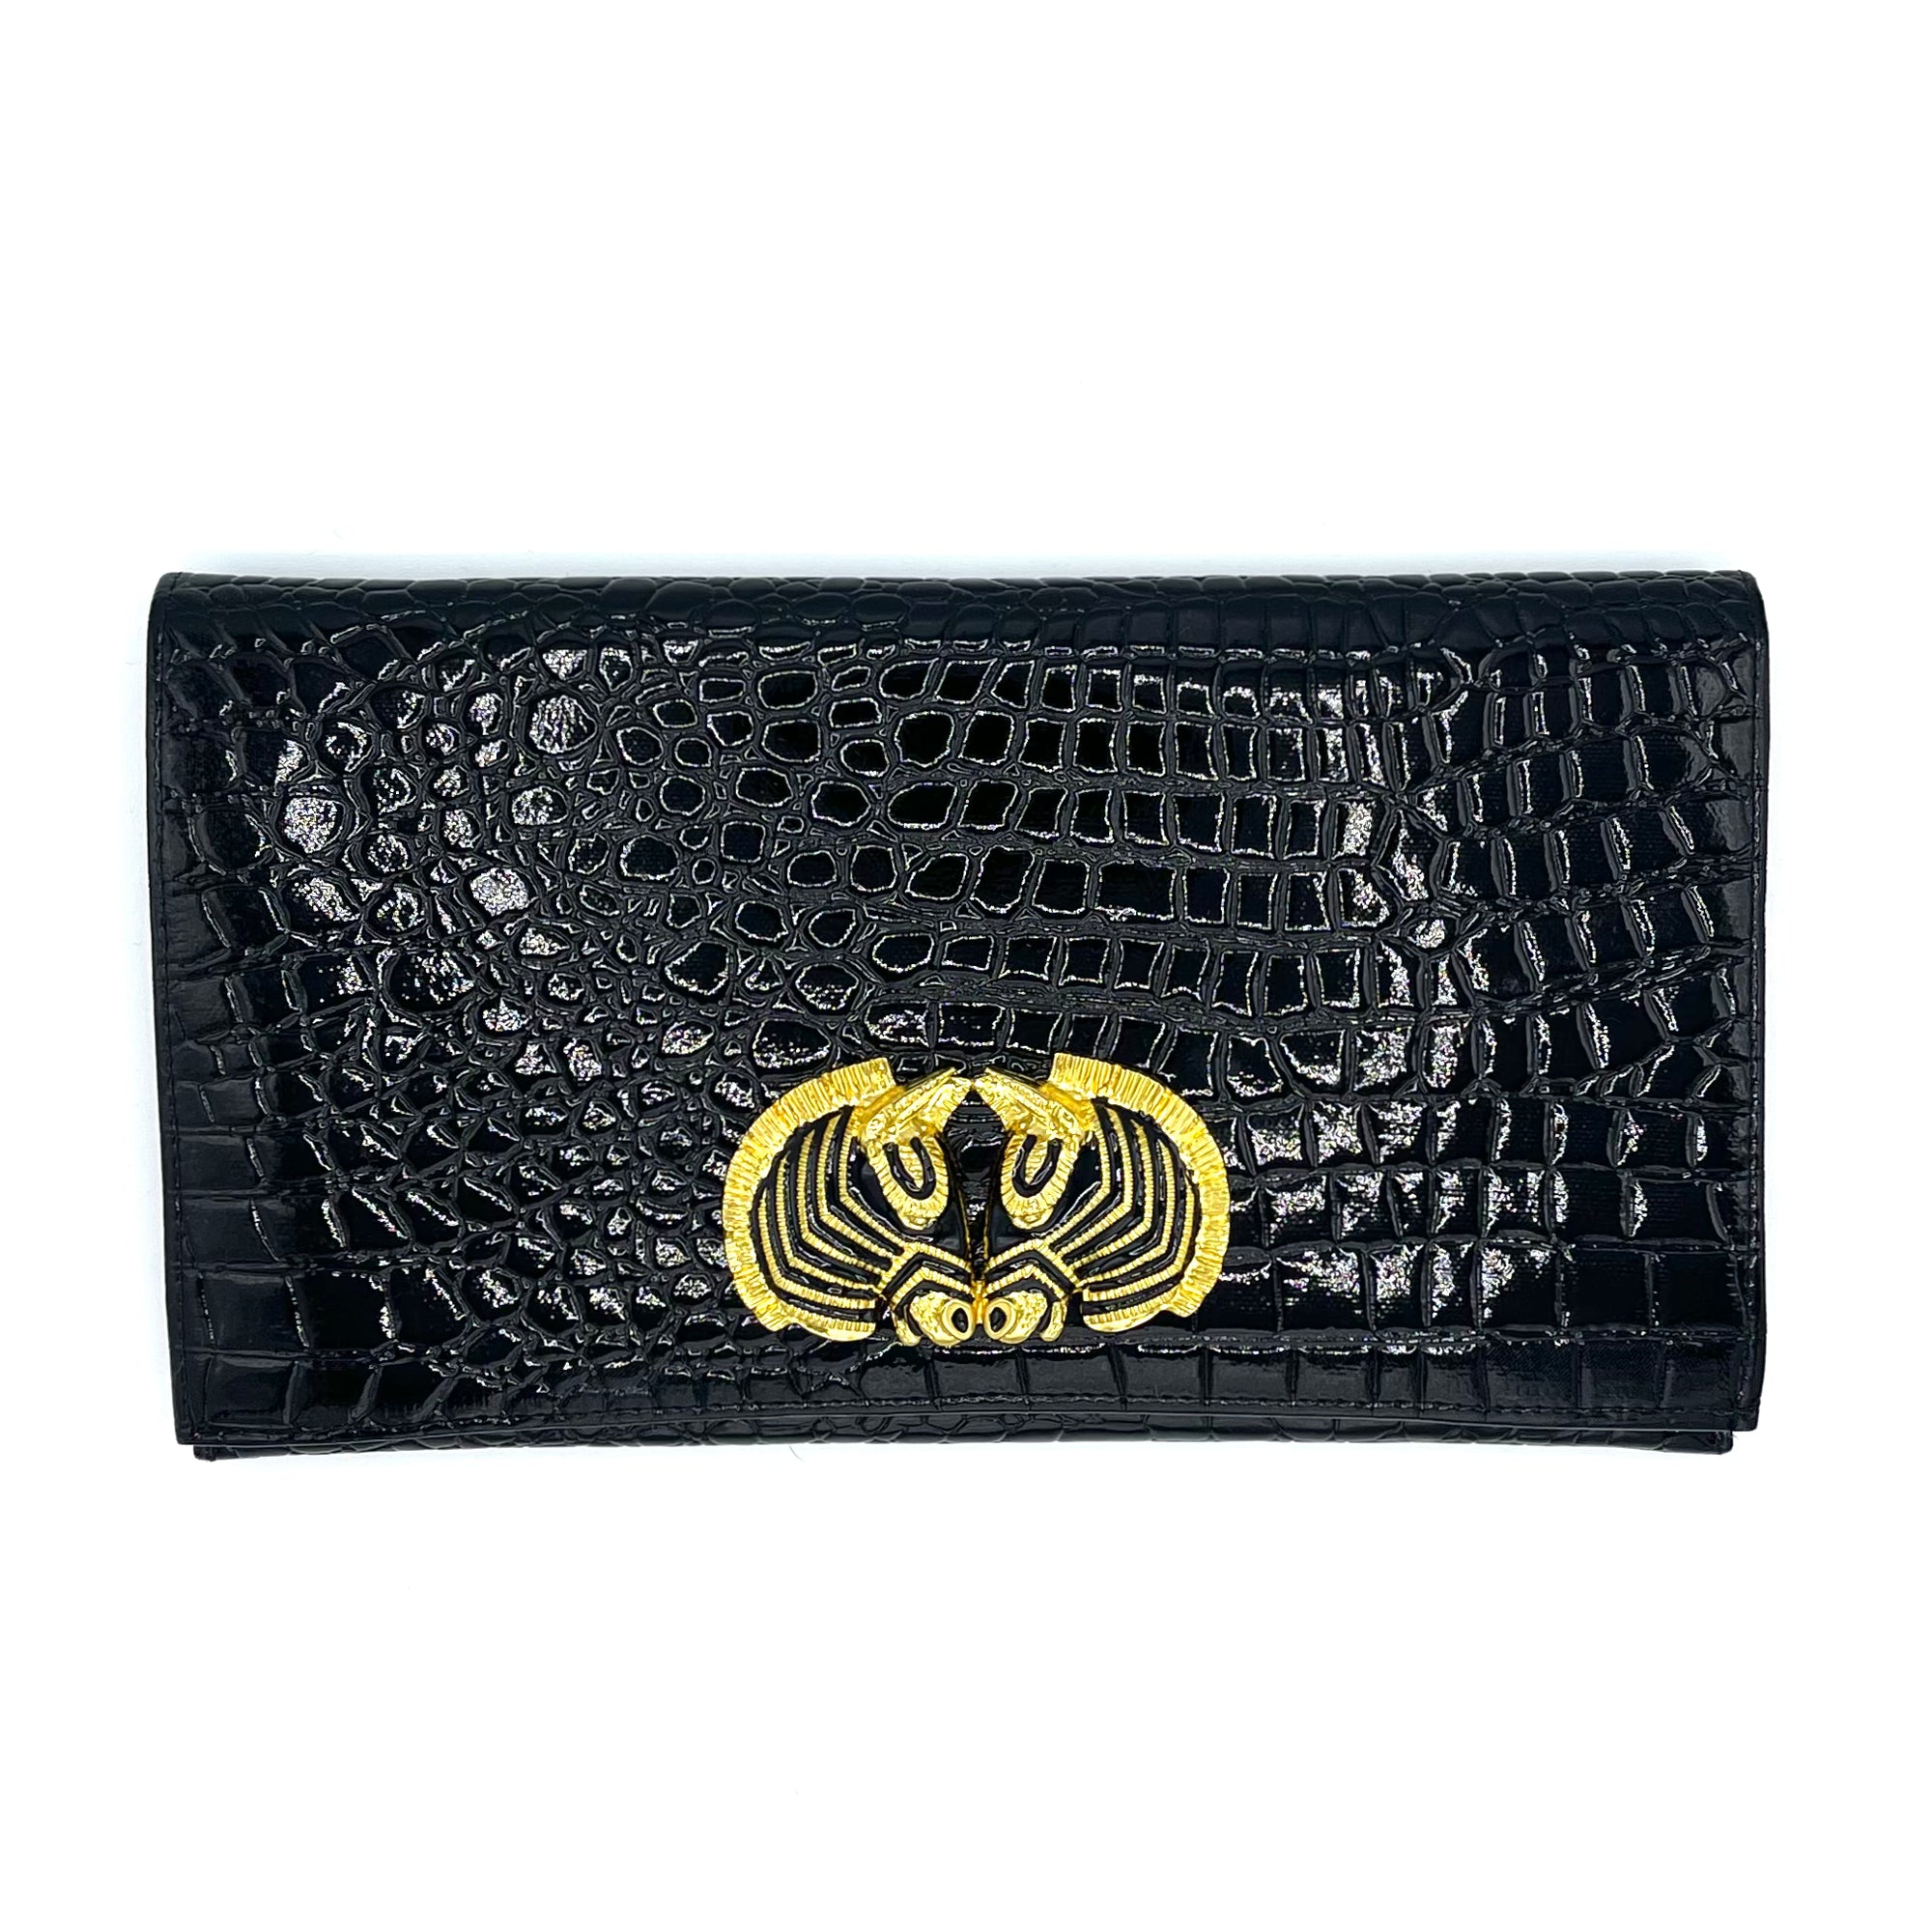 Melissa Clutch (with accordion sides)